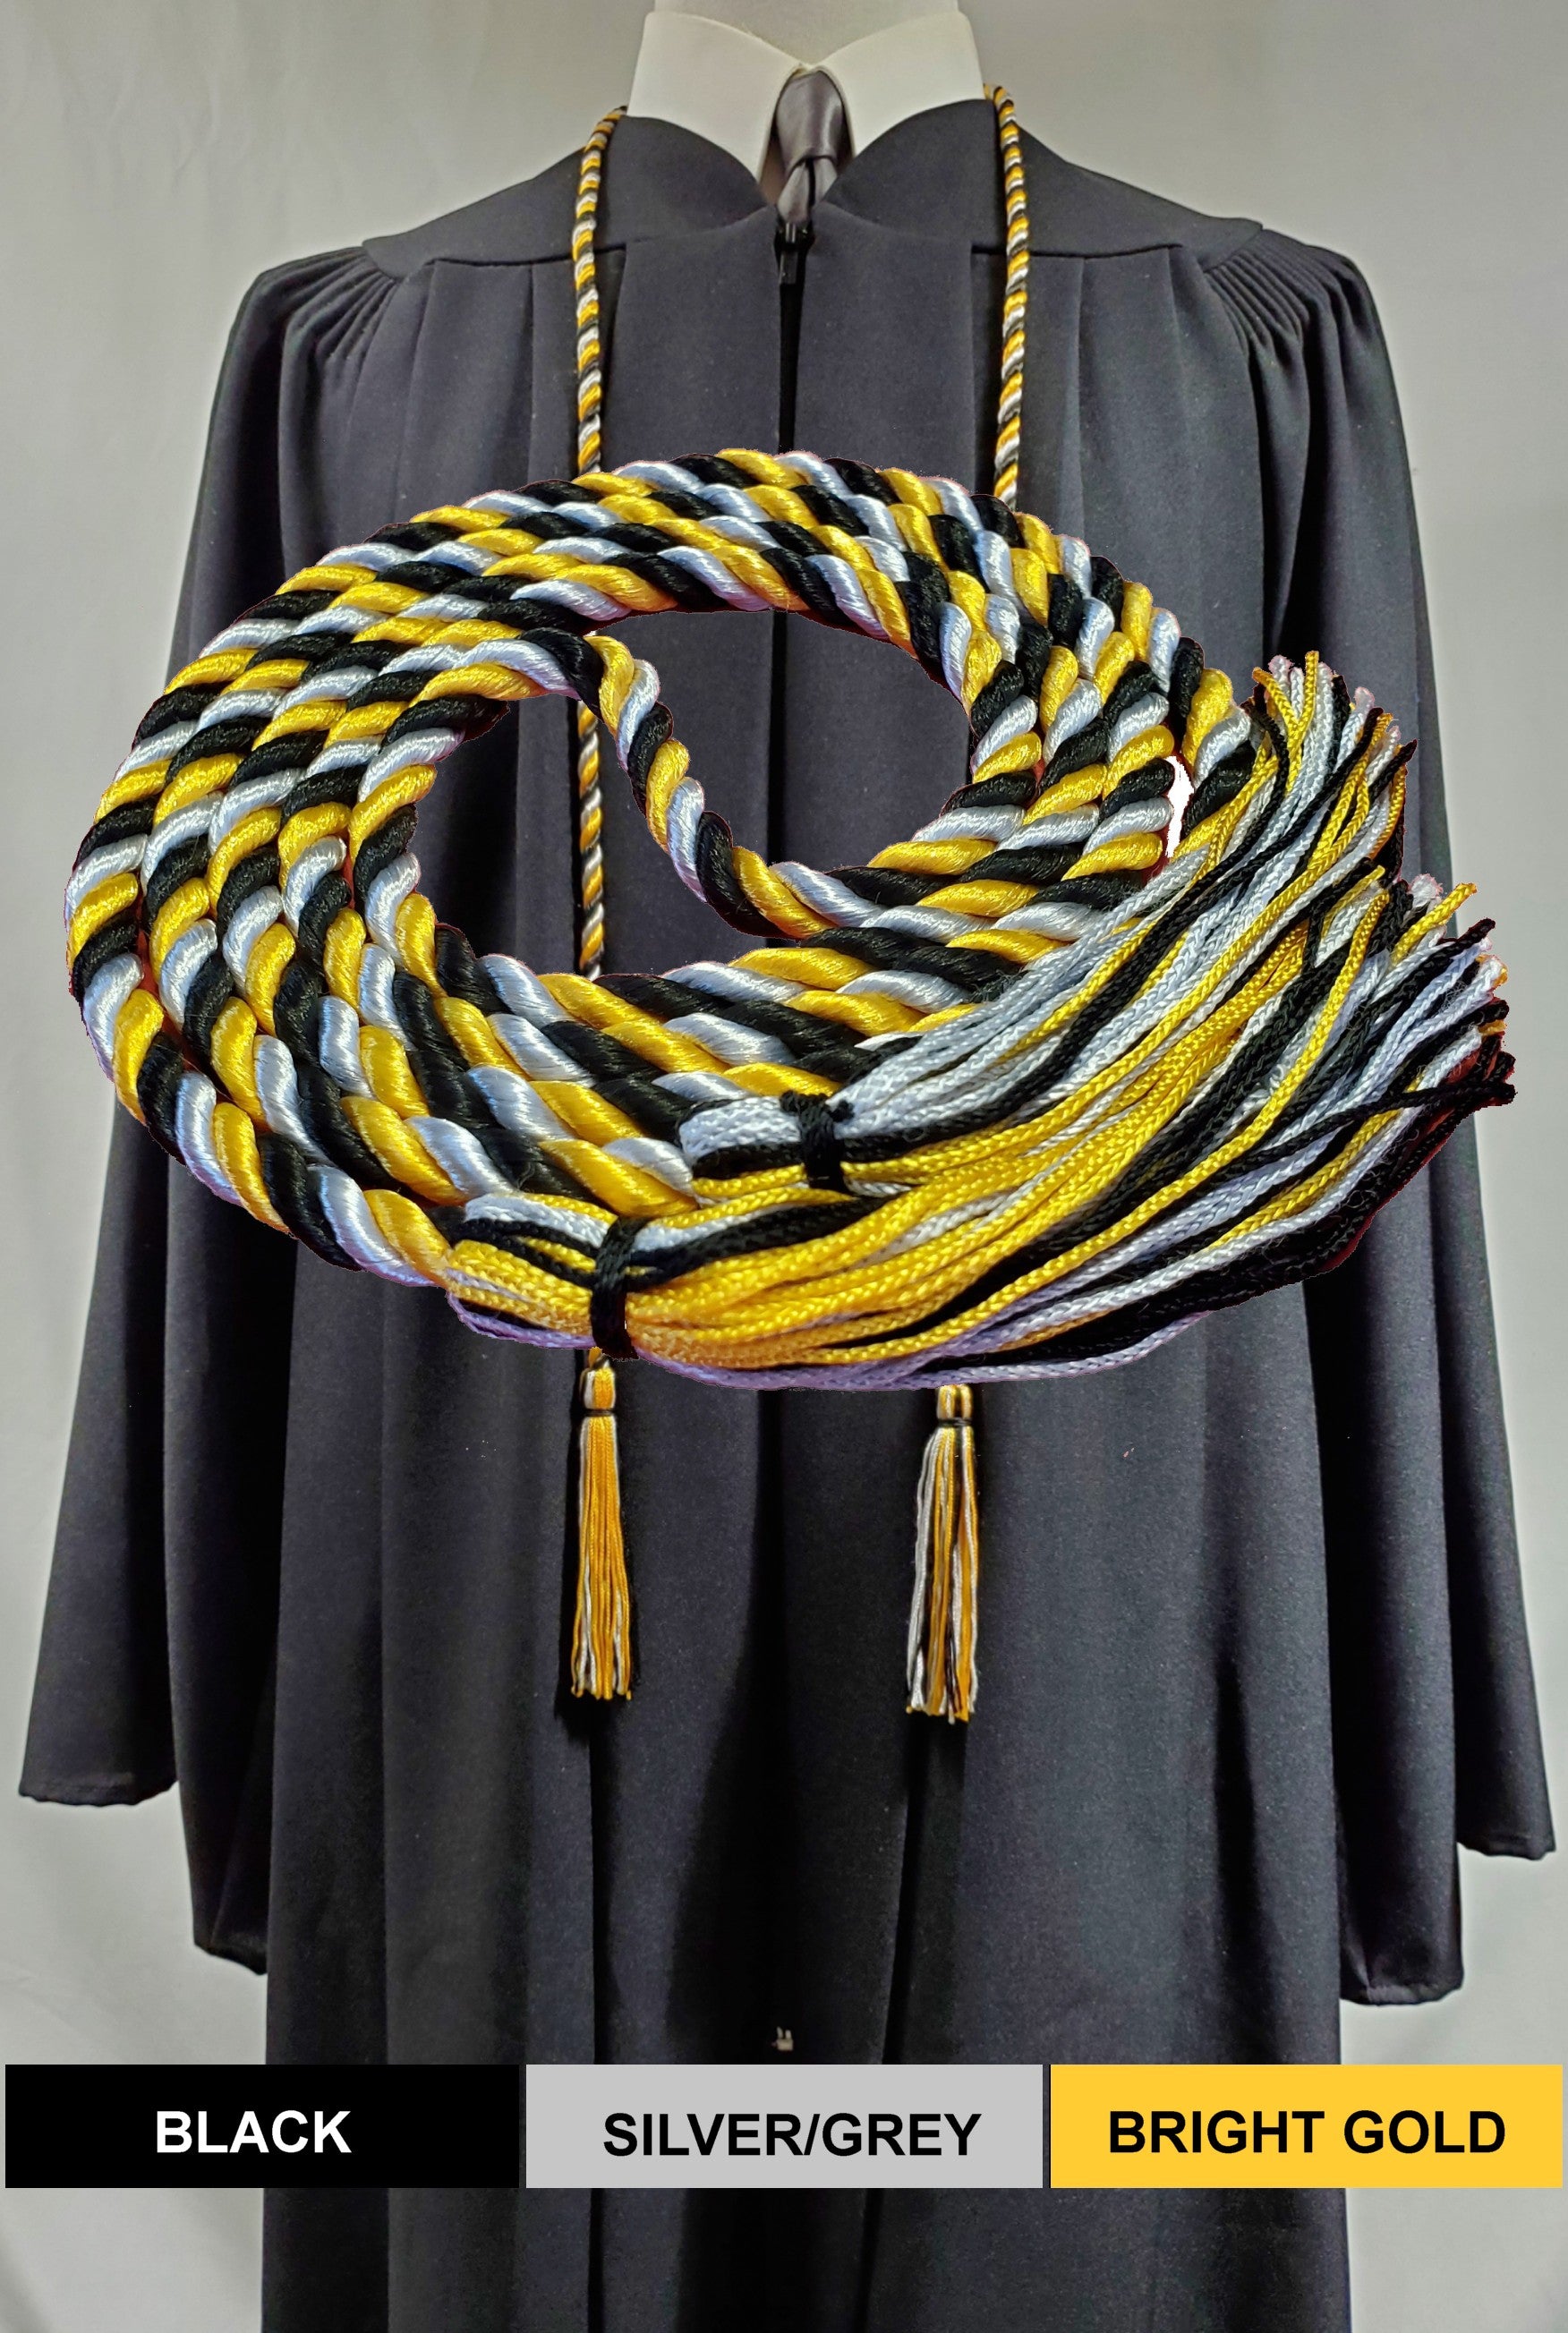 Black and Gold Graduation Cords from Honors Graduation